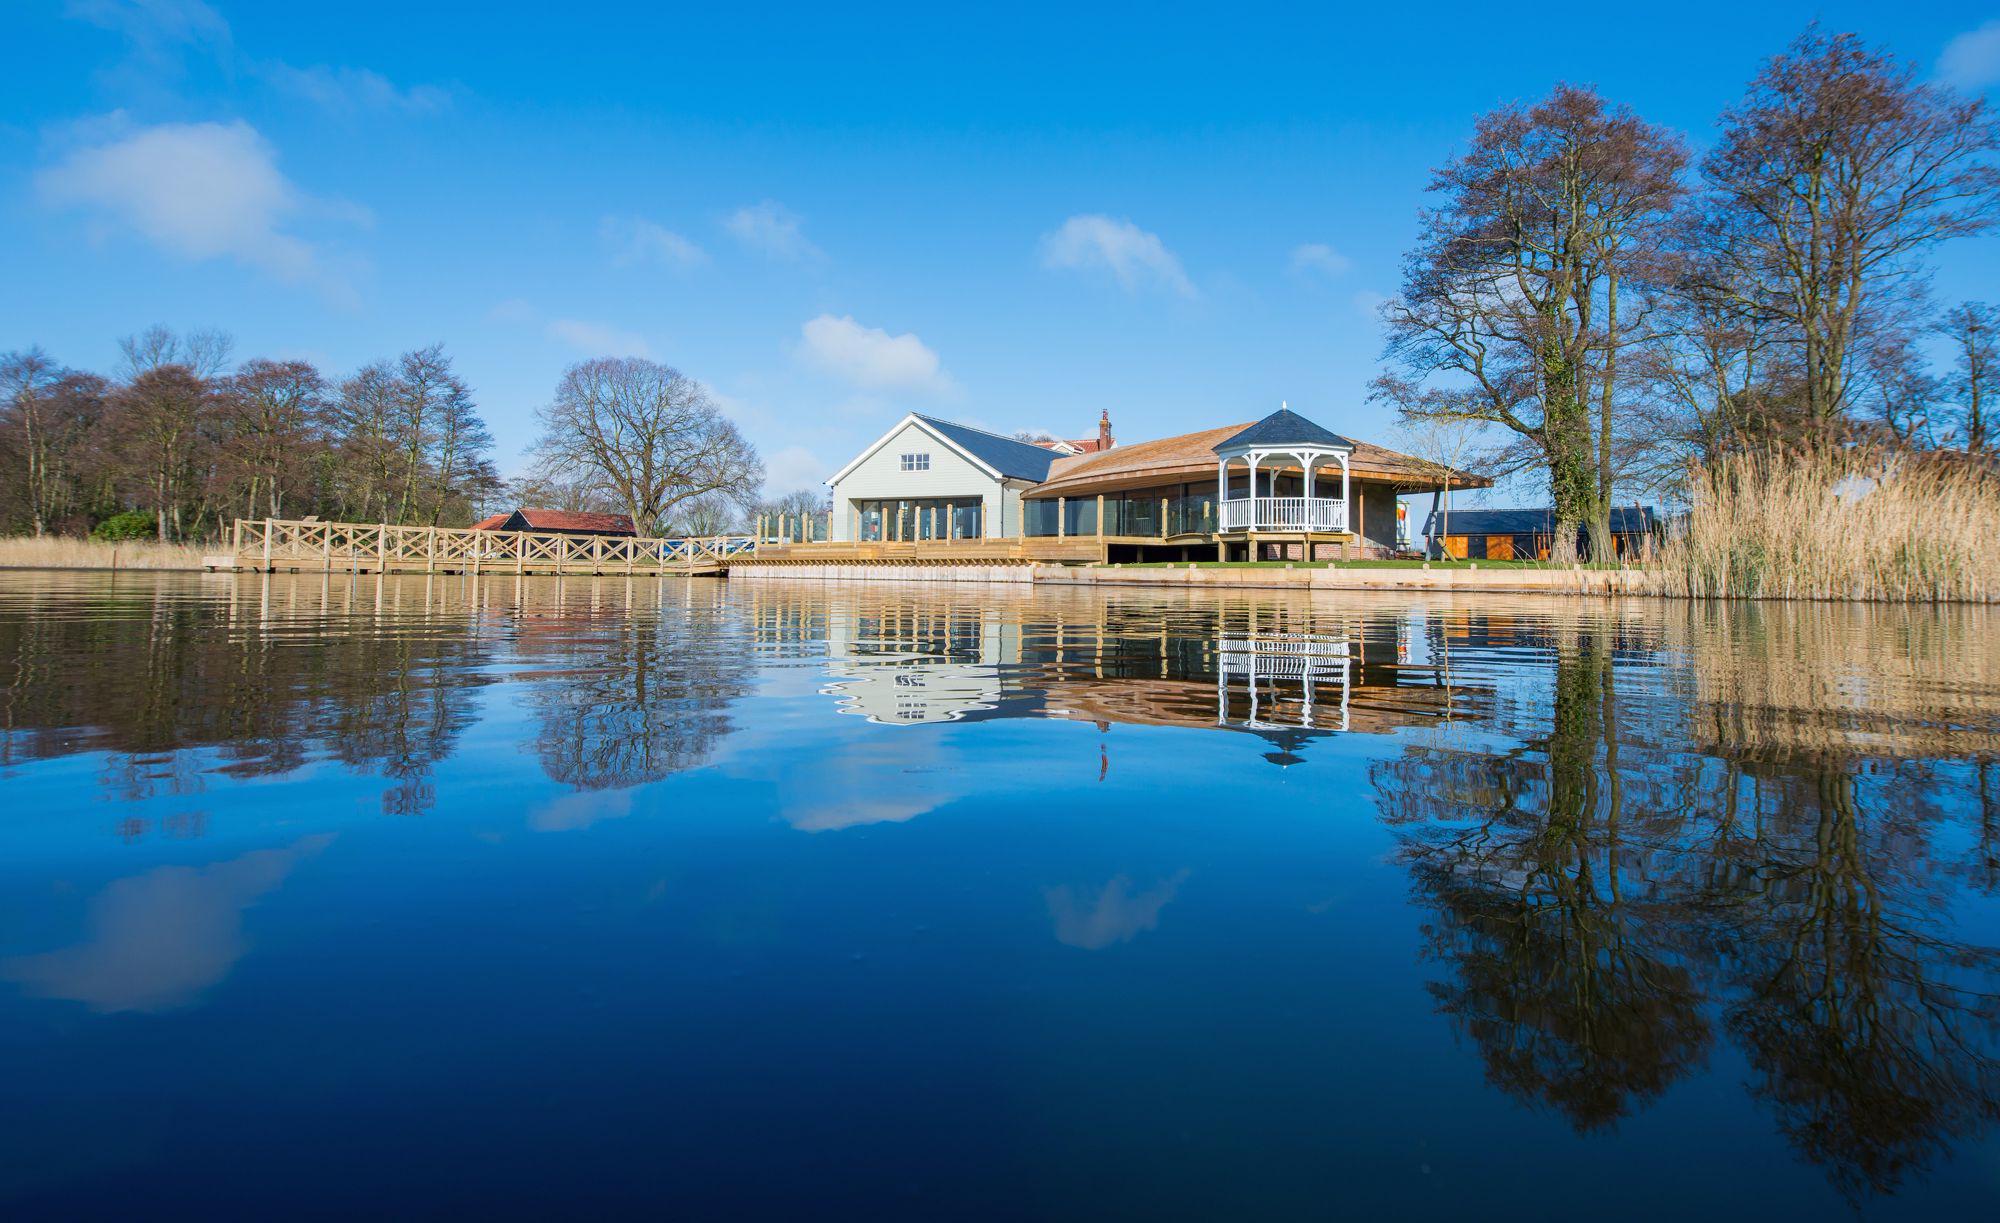 Hotels, Cottages, B&Bs & Glamping in the Norfolk Broads